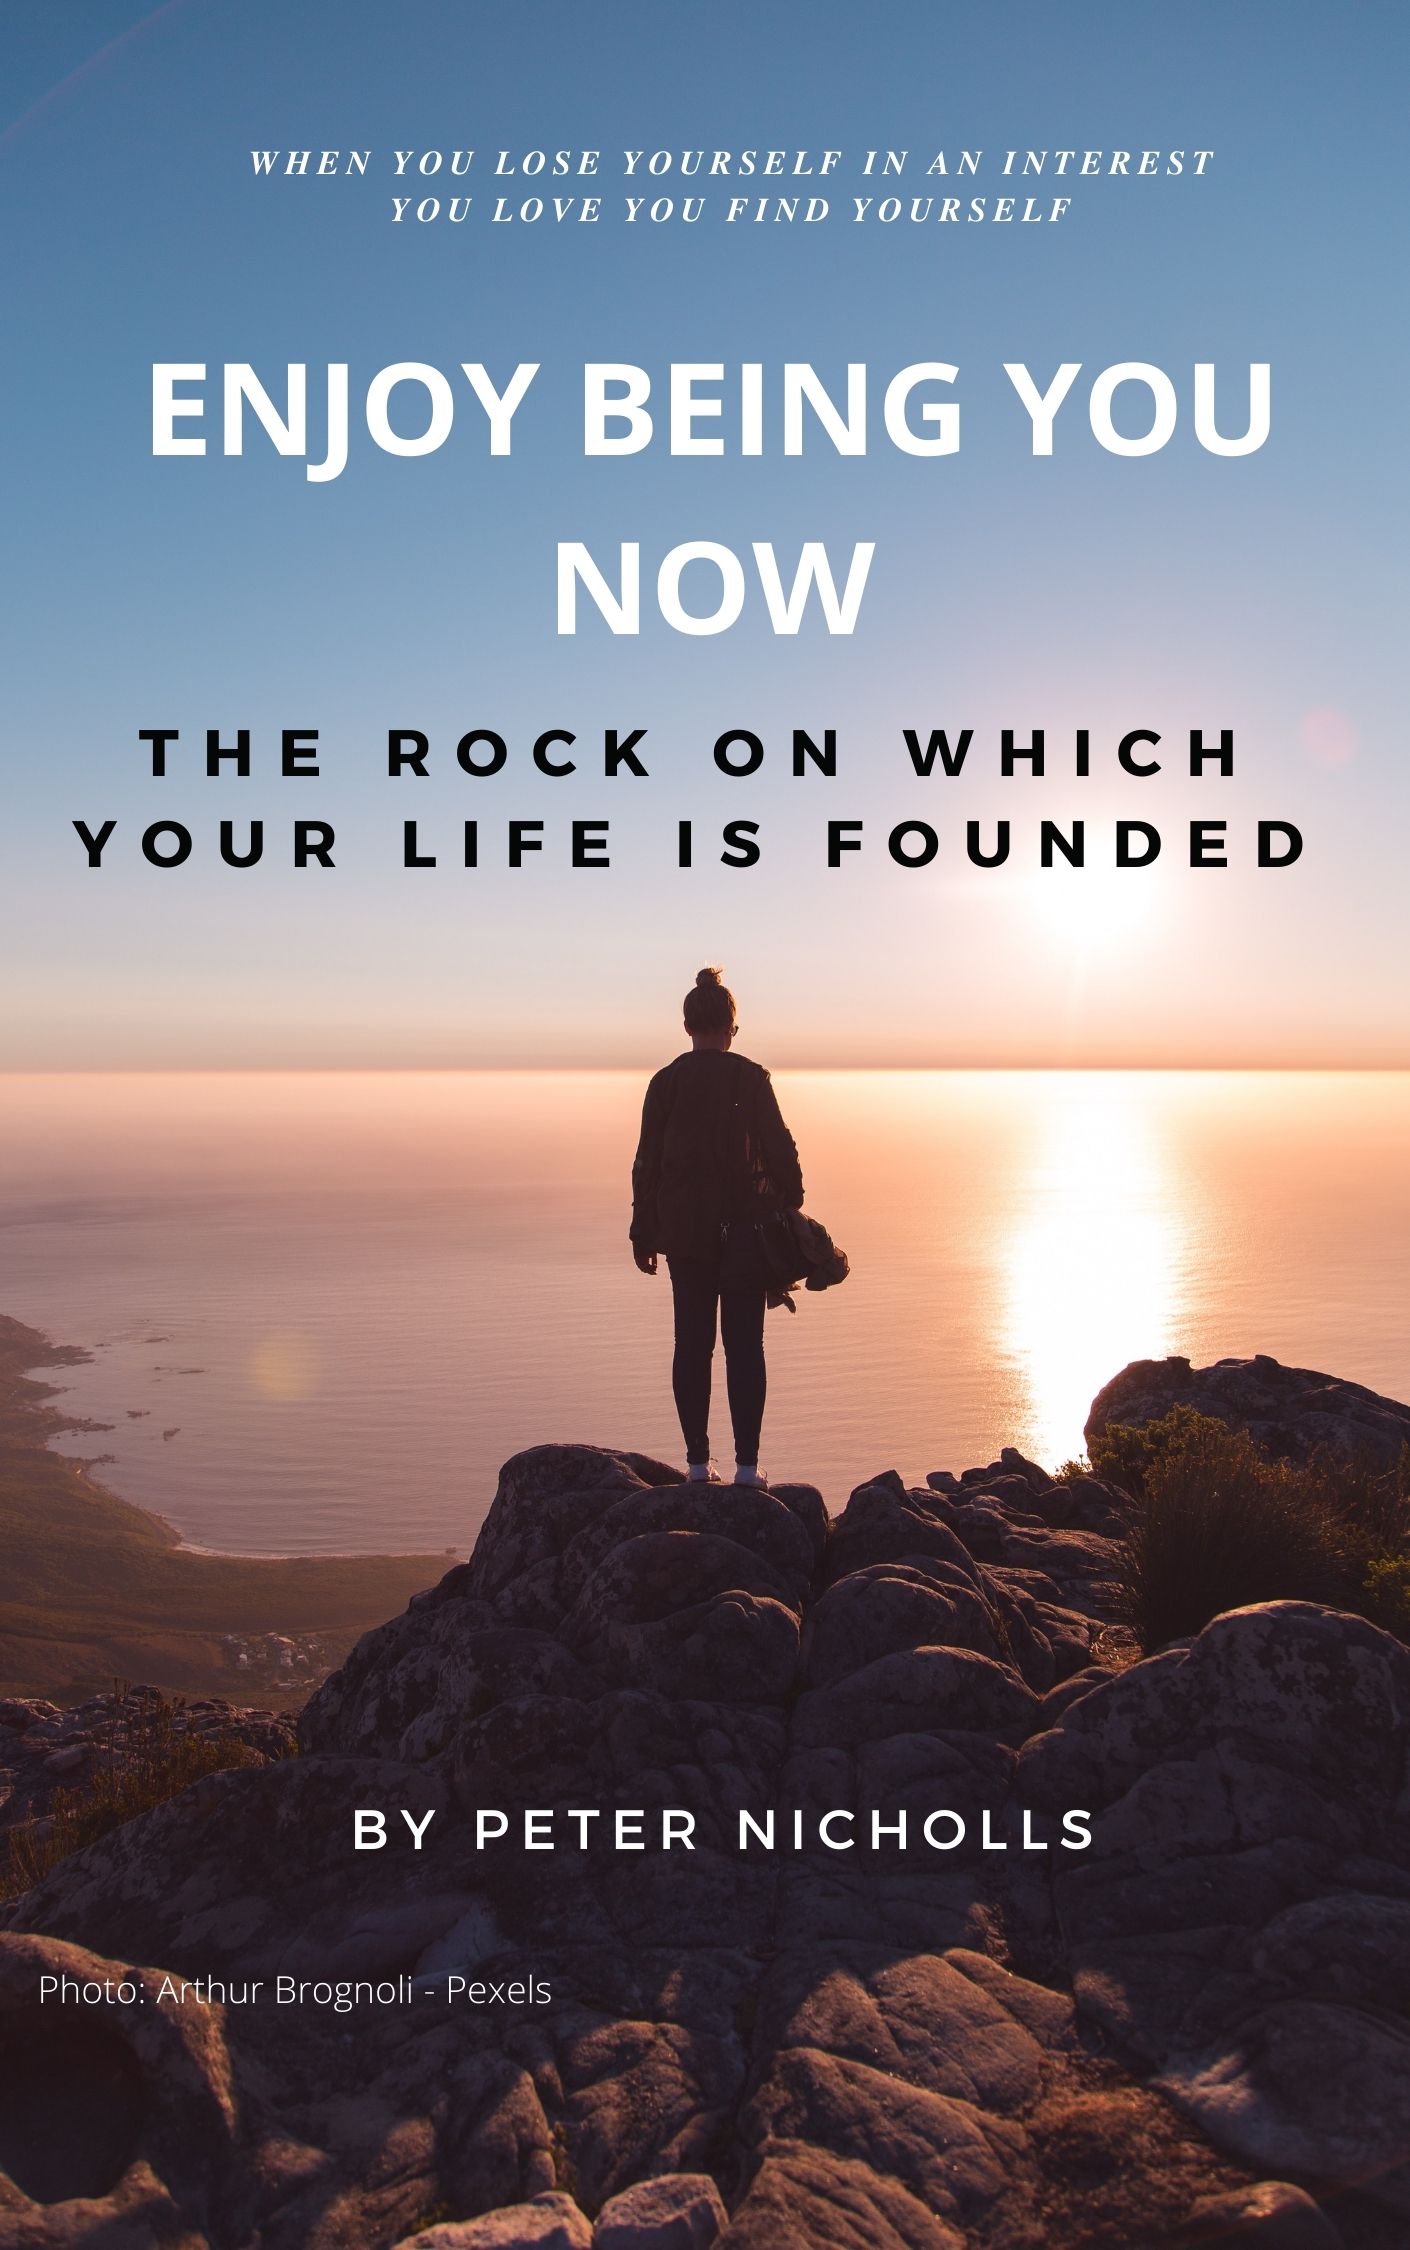 THE ROCK ON WHICH YOUR LIFE IS FOUNDED